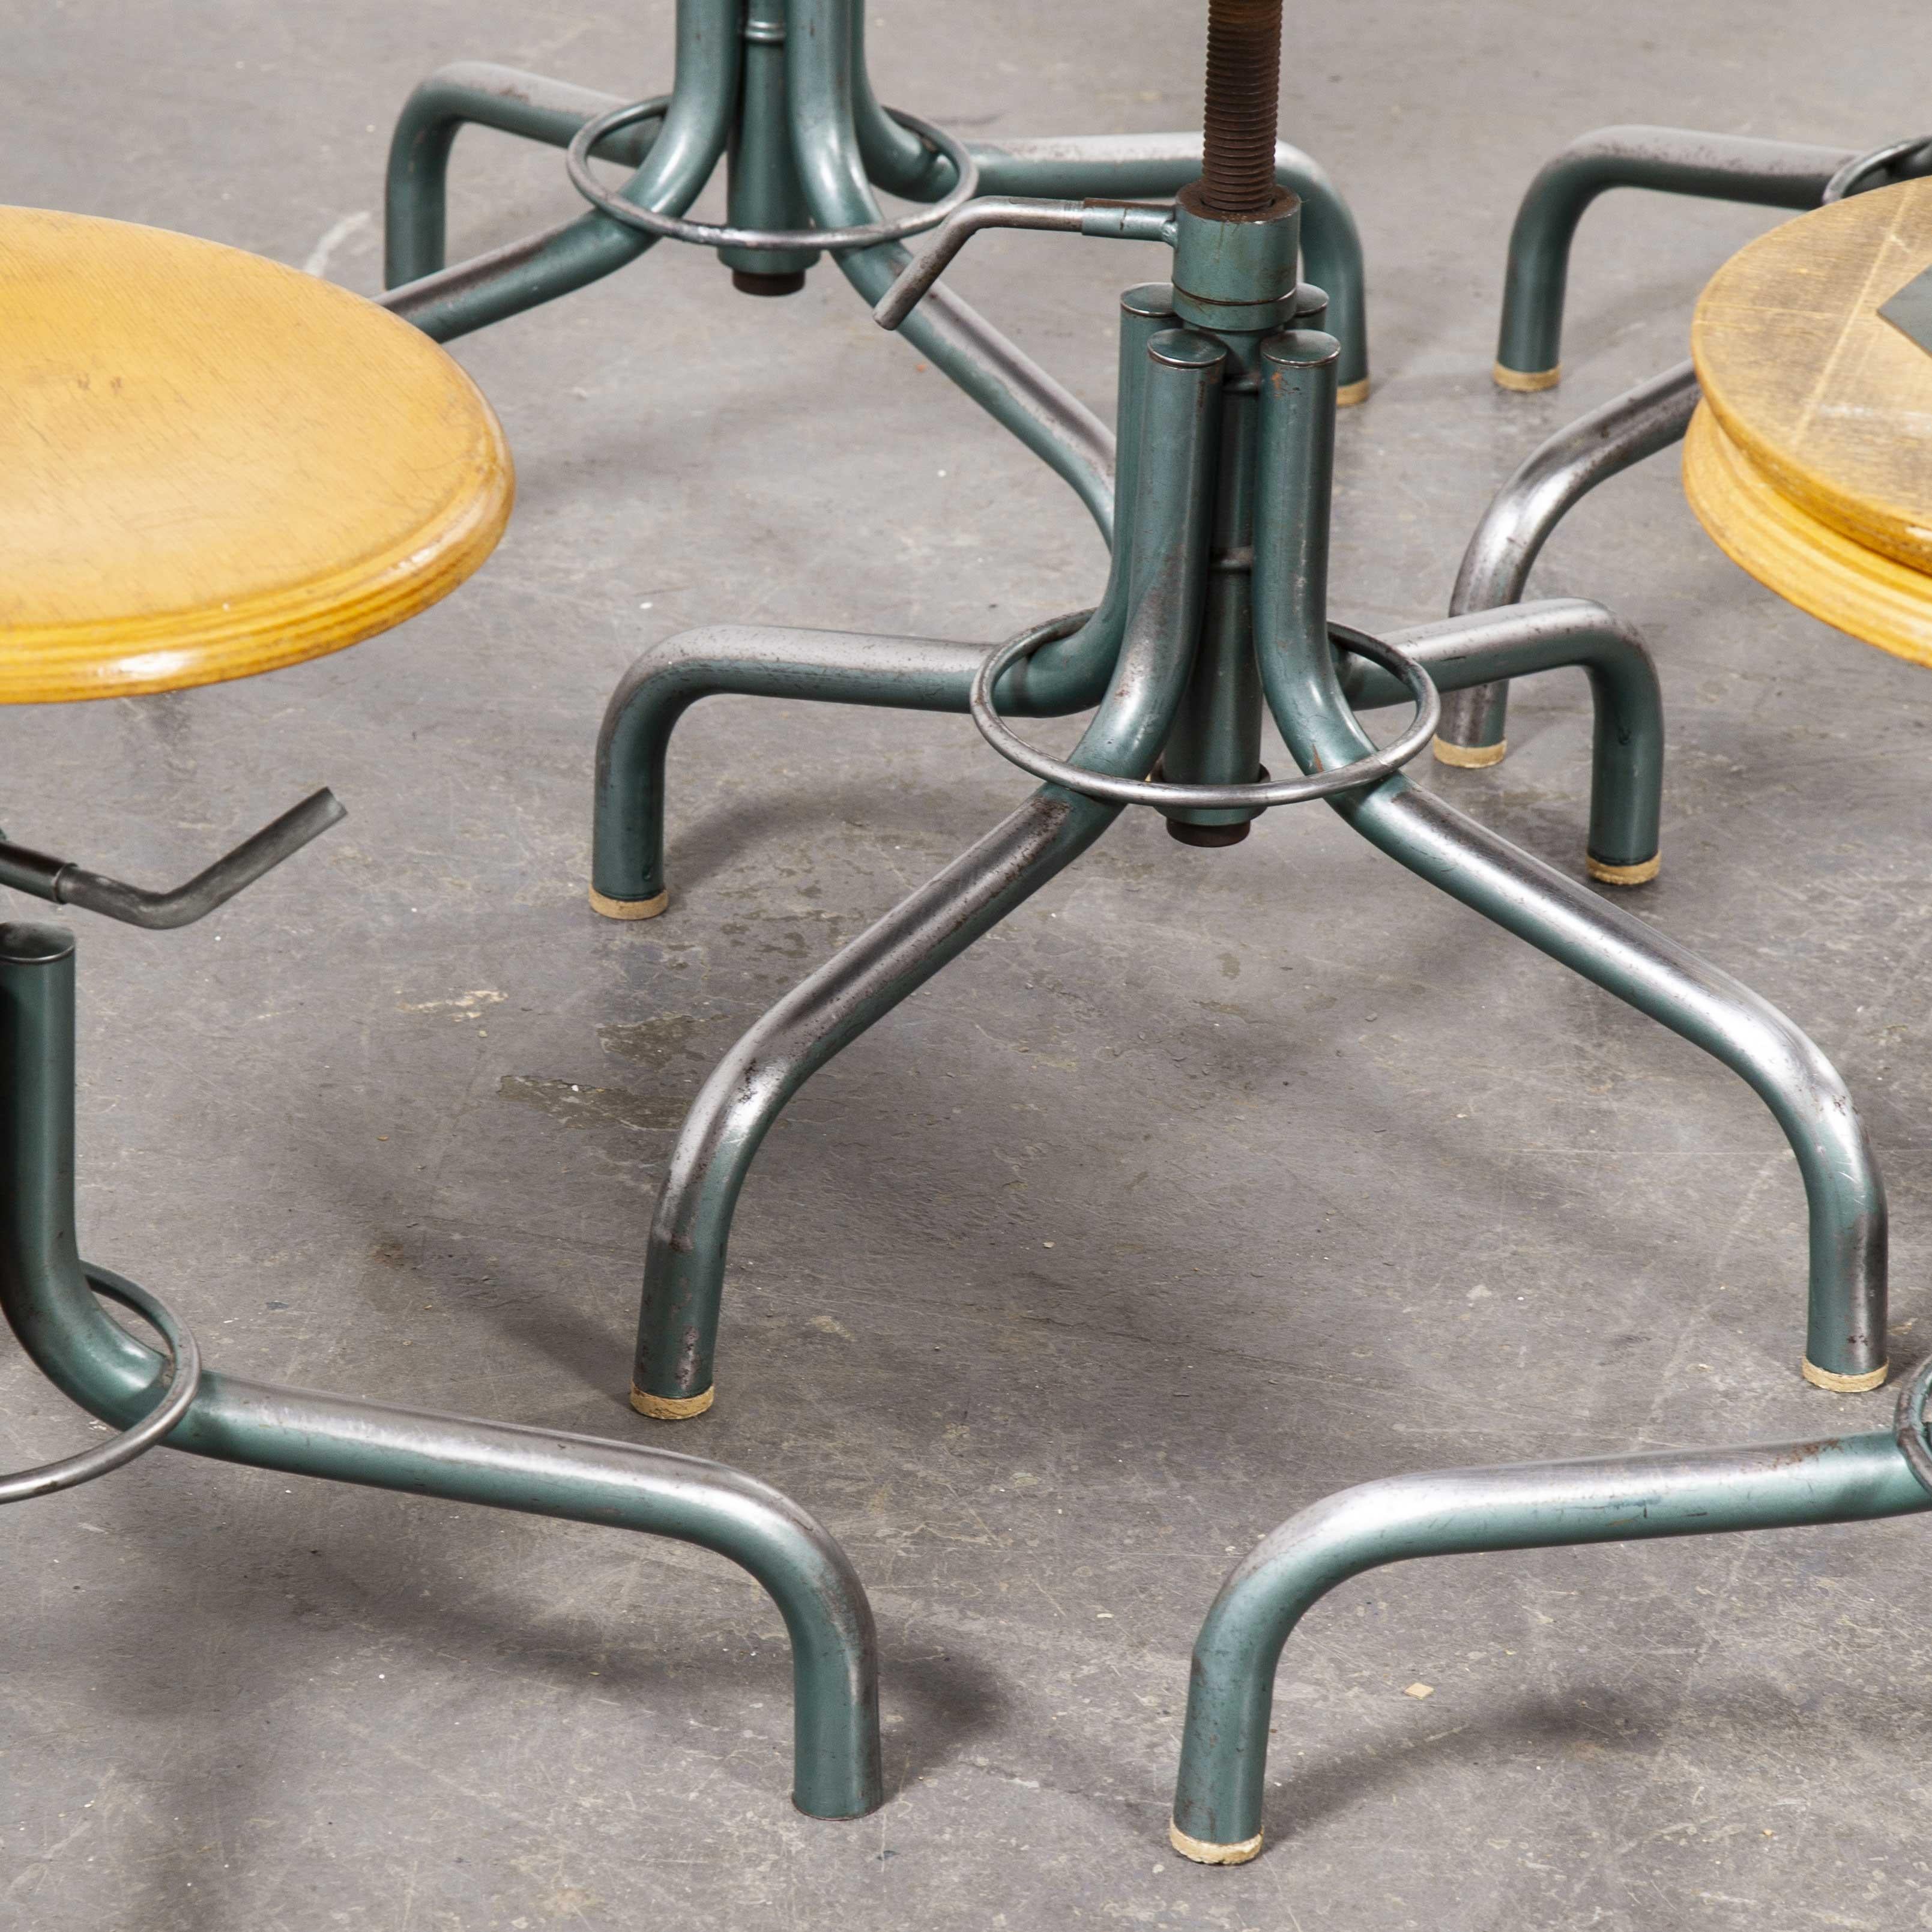 1960s French original Flambo swiveling stools. In 1926 Henri Lieber, a French Industrial designer created his first Industrial stool designed specifically to improve the comfort of women sitting in offices throughout France. Flambo is one of the